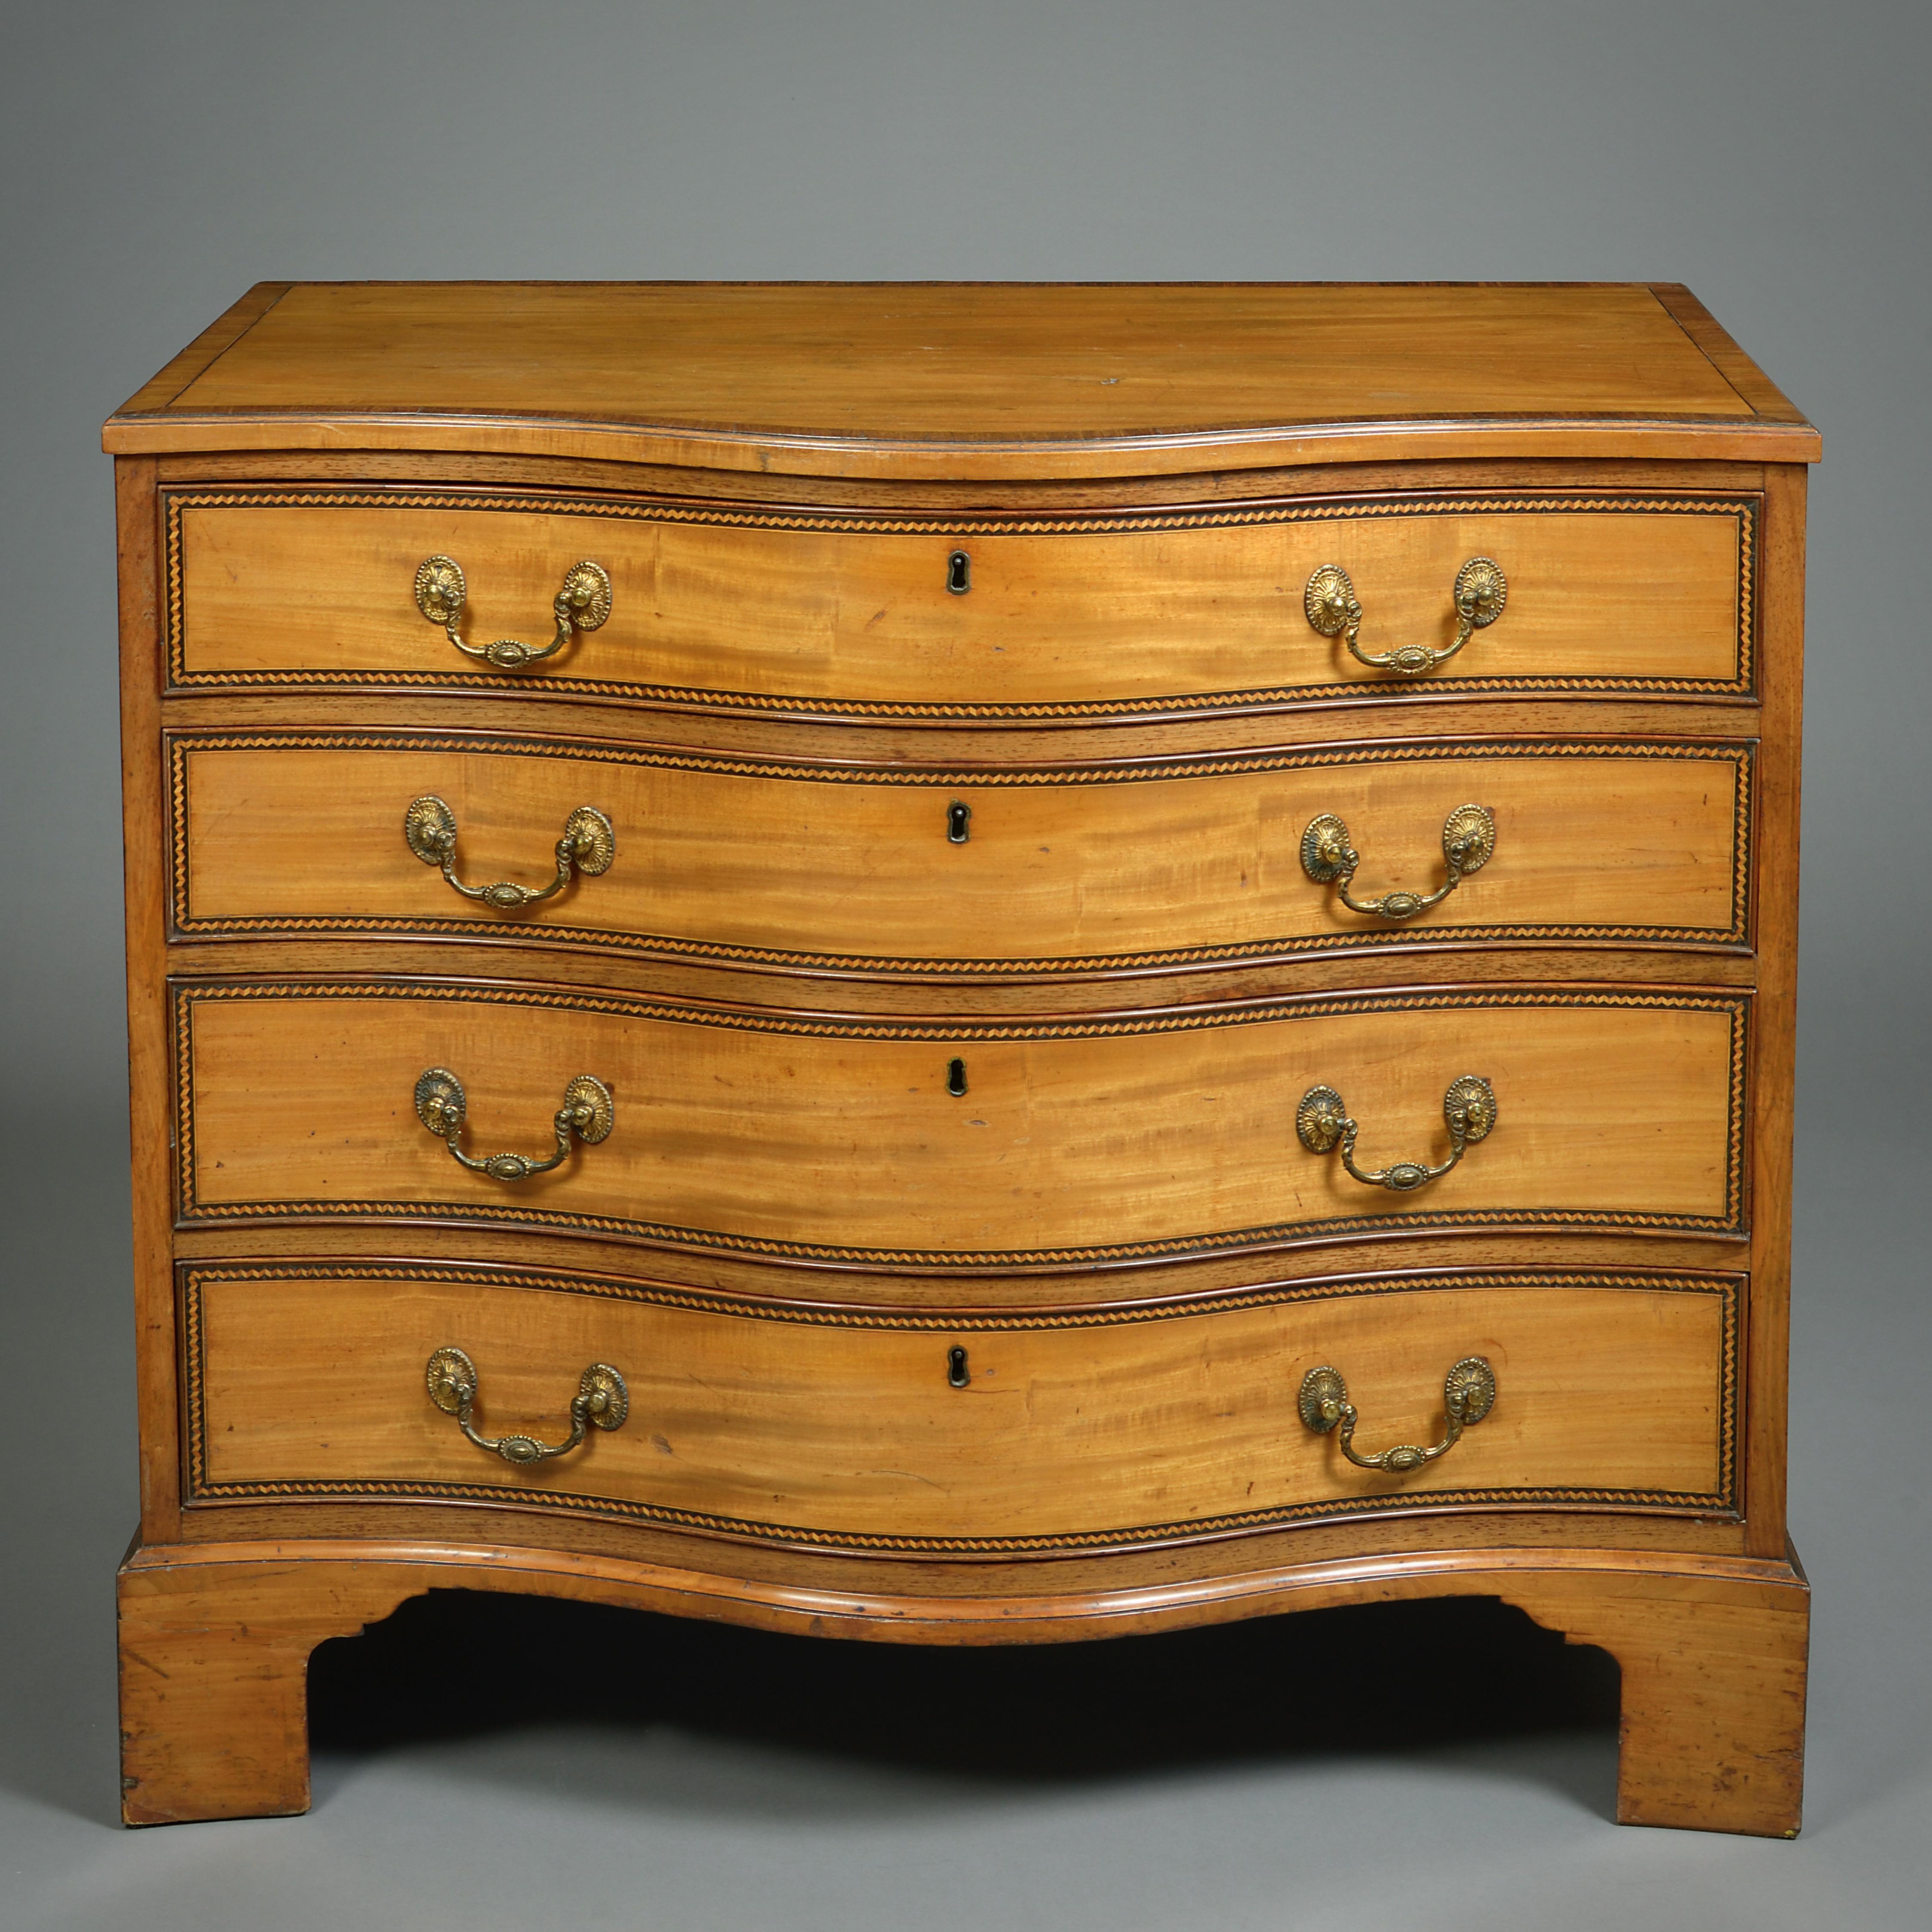 A FINE GEORGE III SATINWOOD SERPENTINE COMMODE, CIRCA 1780.

Cross-banded in tulipwood, the drawers edged with a trompe l'oeil zig-zag banding.